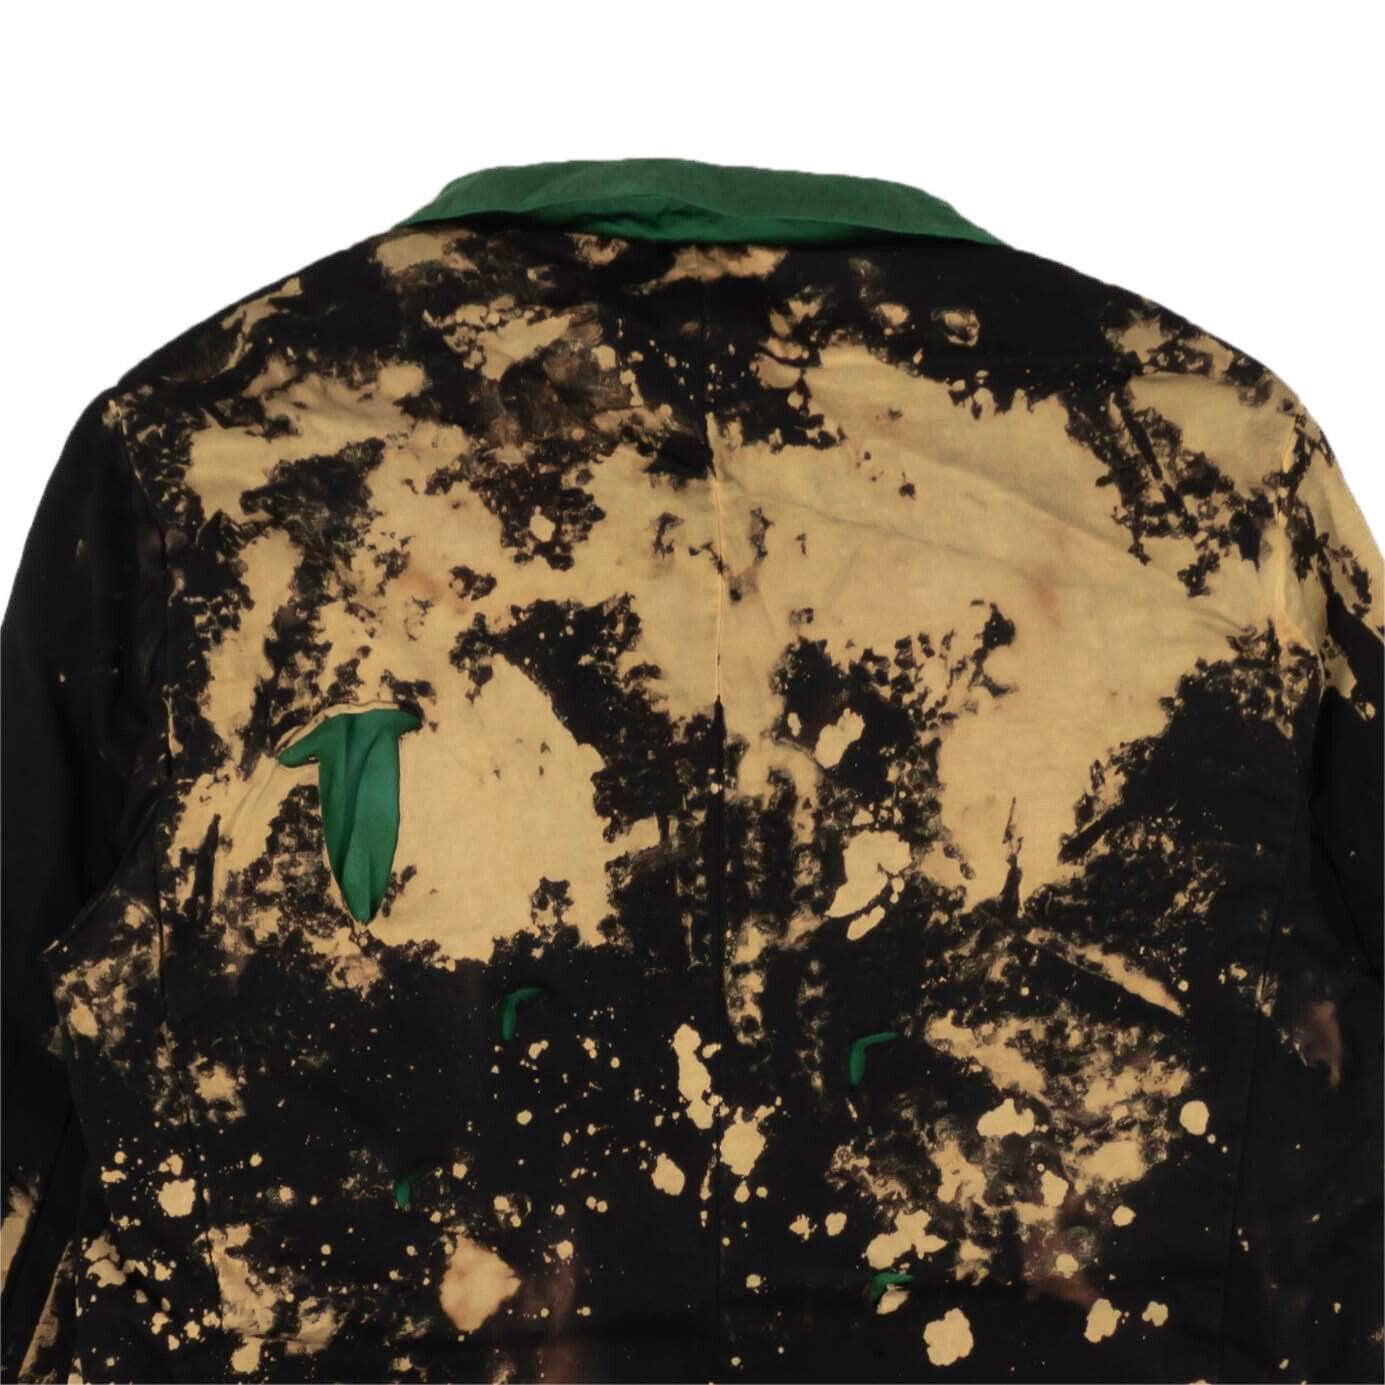 424 ON FAIRFAX 424-on-fairfax, 500-750, channelenable-all, chicmi, couponcollection, gender-mens, main-clothing, mens-shoes, size-46, size-48, size-50, size-52 Black And Green Distressed Bleached Blazer